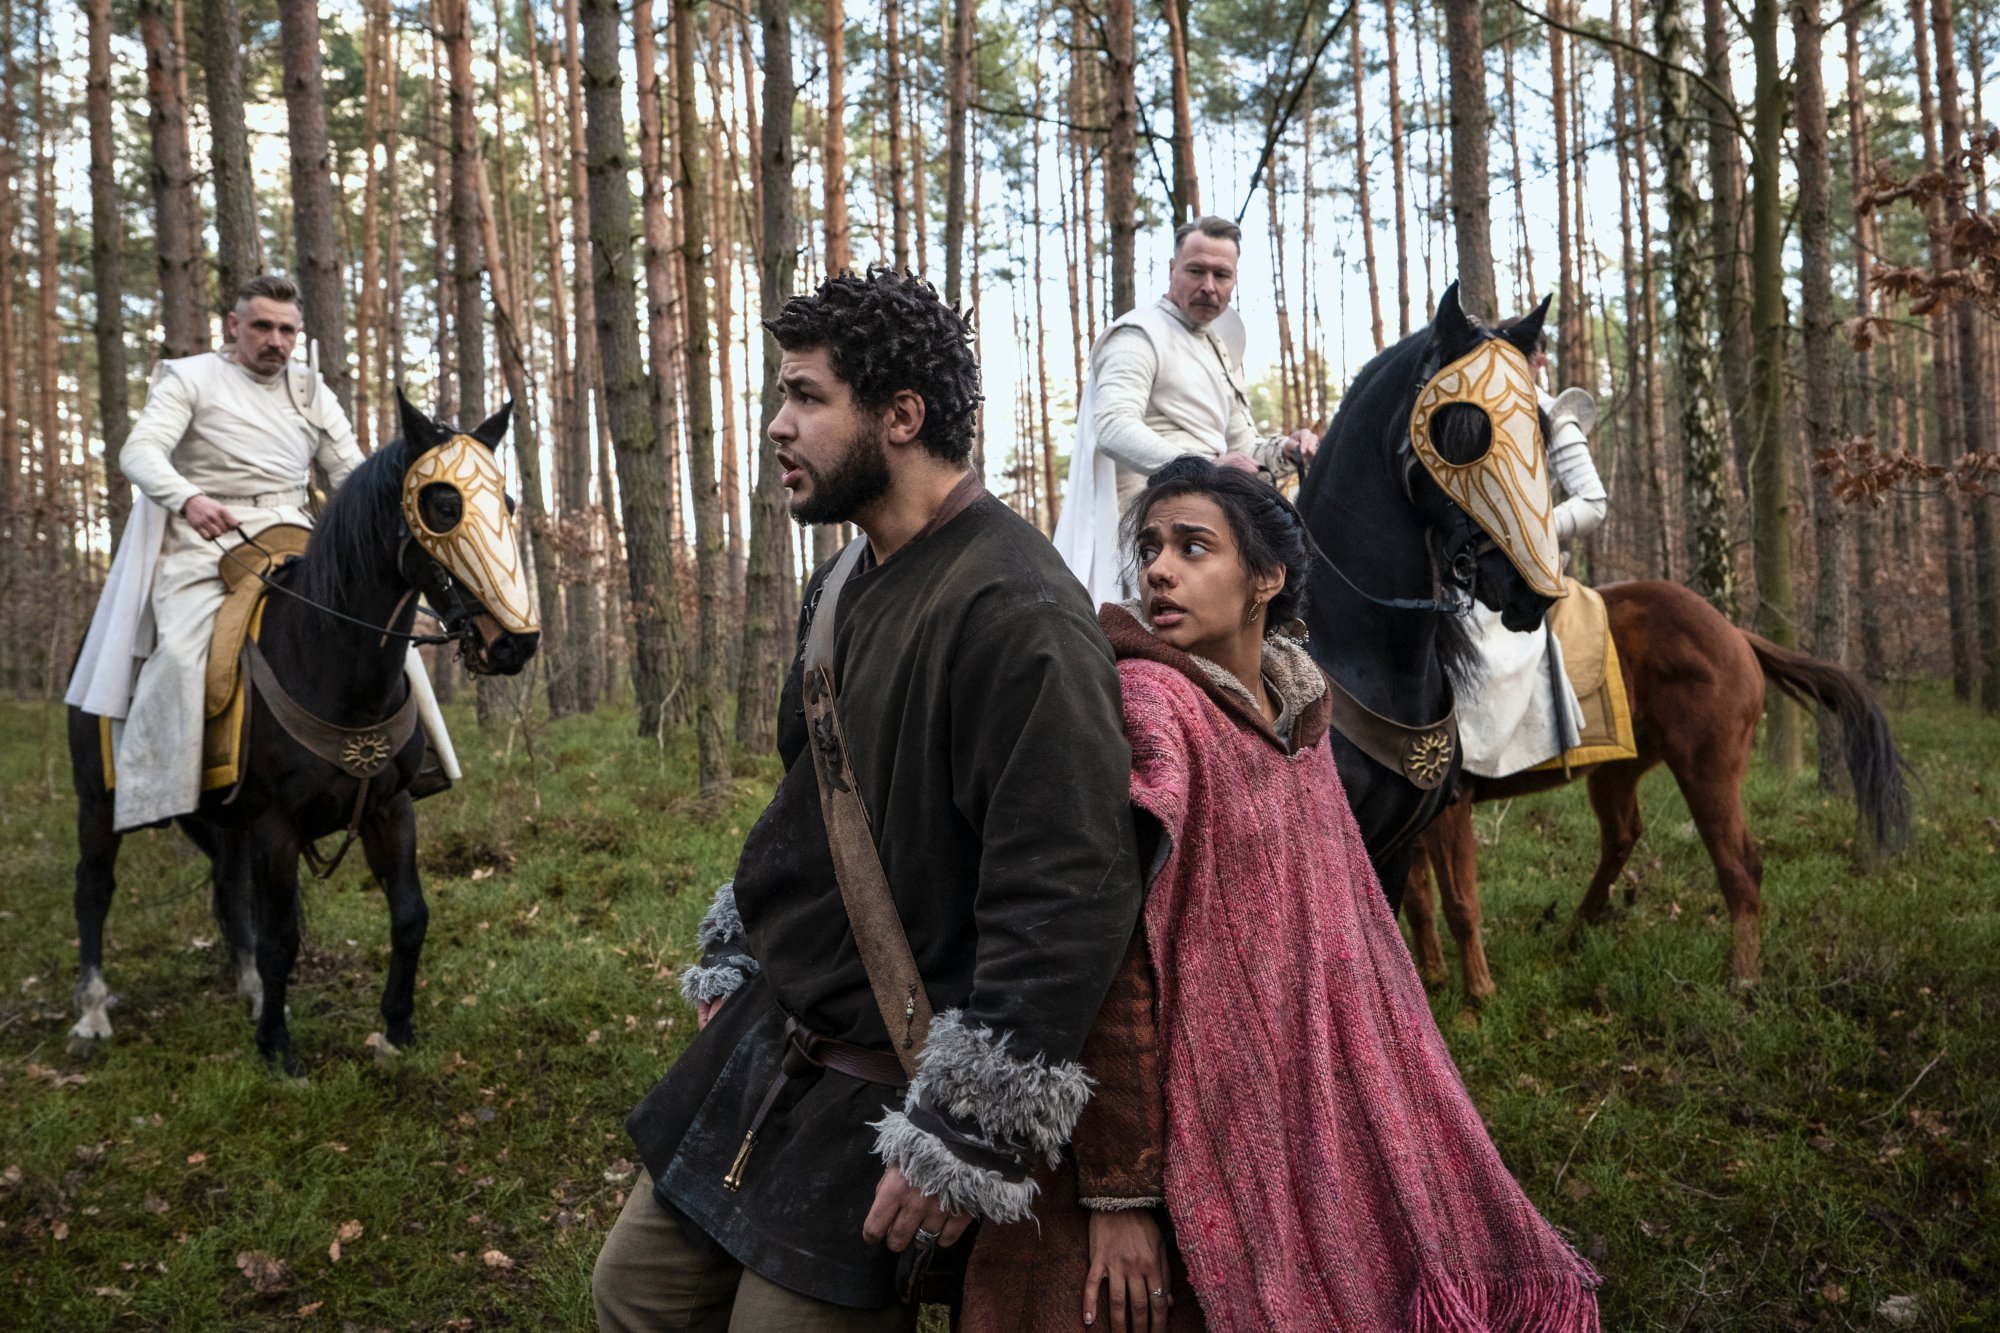 Marcus Rutherford and Madeleine Madden in 'The Wheel of Time' Episode 5. They're standing back to back and being surrounded by men wearing white and riding on horseback.